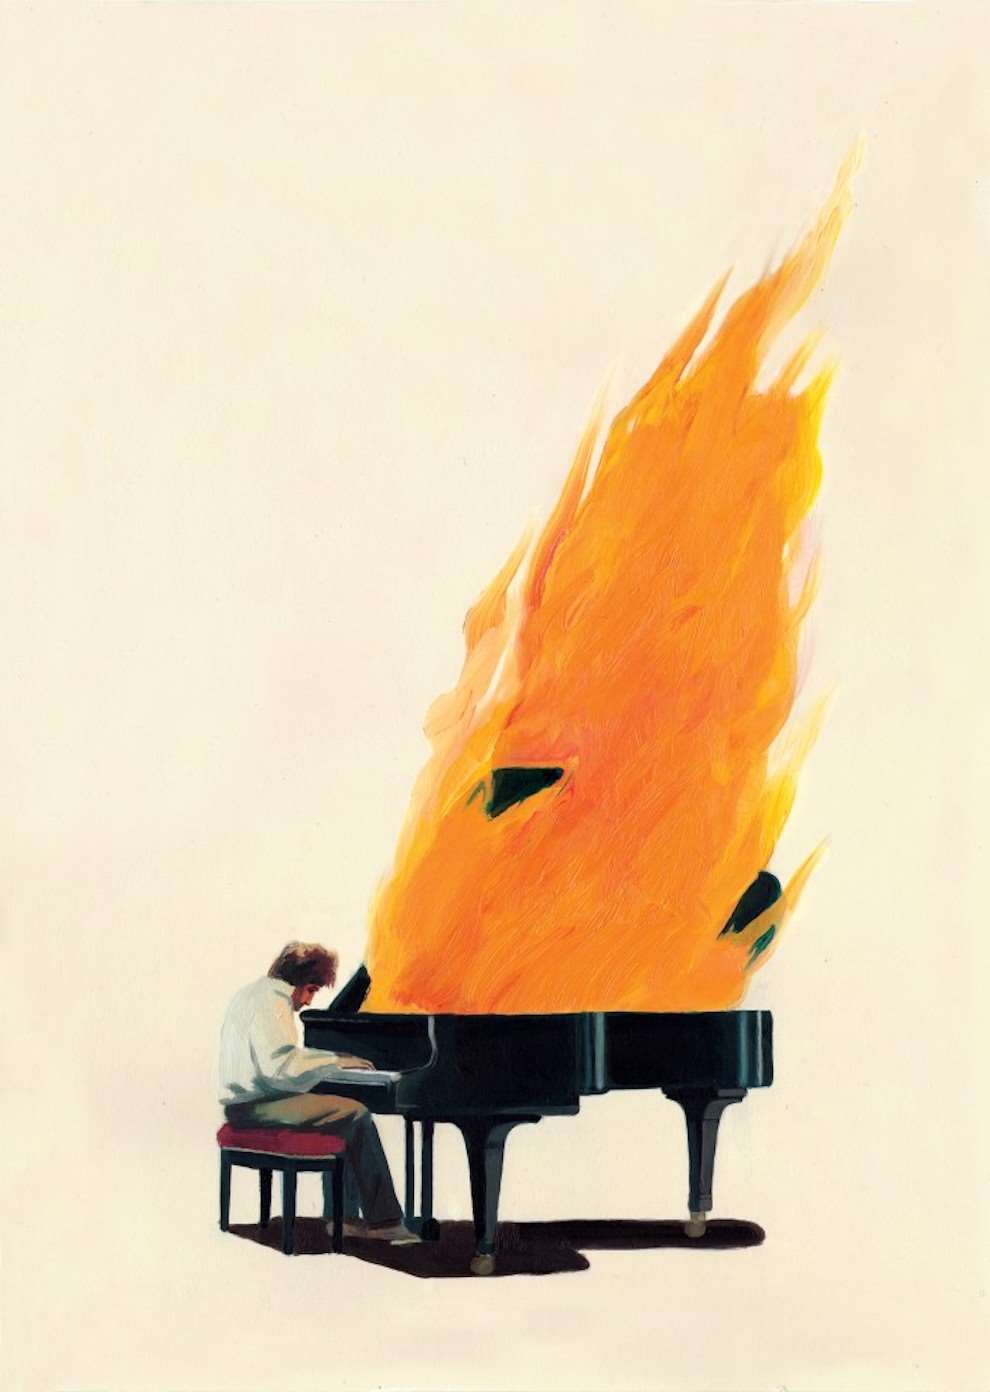 David De Las Heras, Painterly oil conceptual illustration of a man playing a paint on fire. 